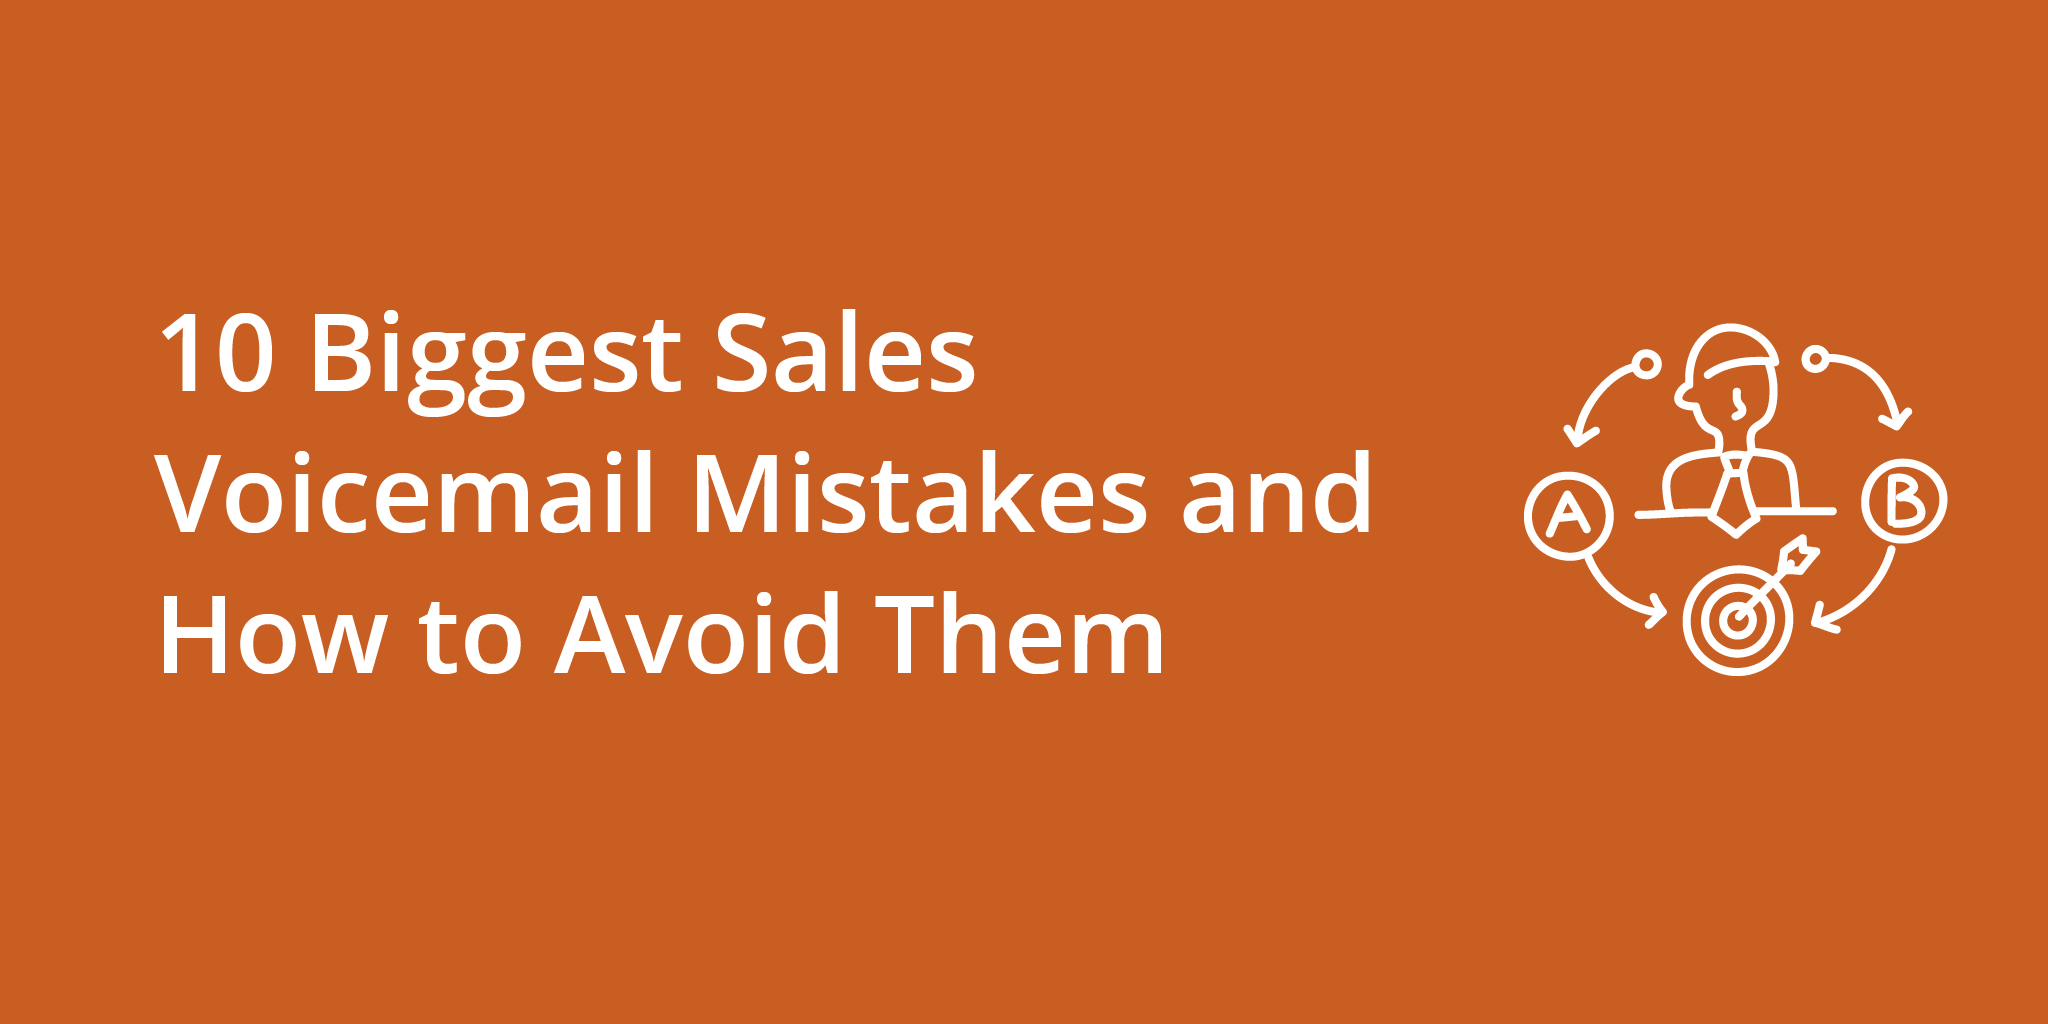 10 Biggest Sales Voicemail Mistakes and How to Avoid Them | Telephones for business